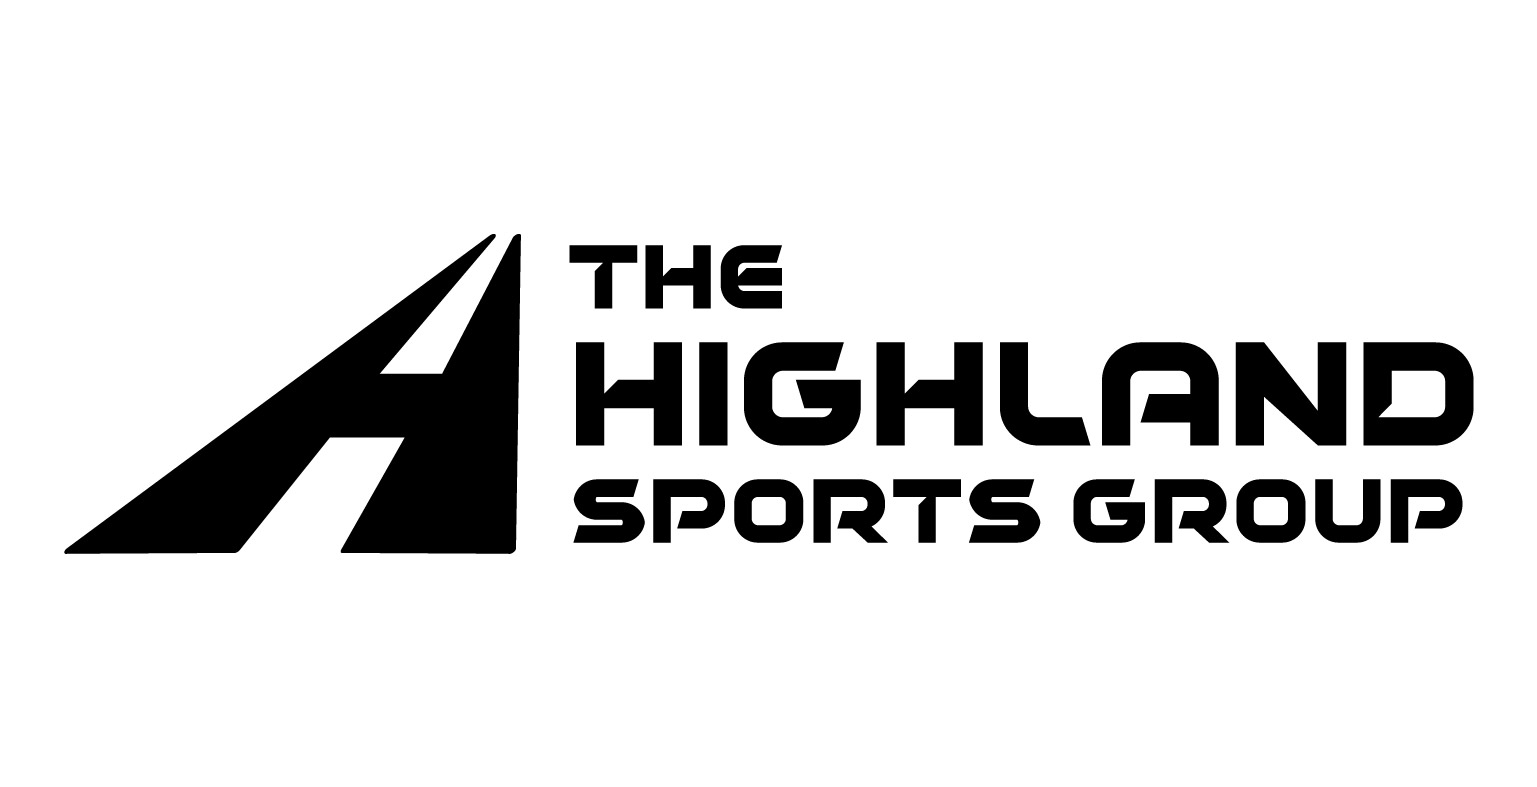 The Highland Sports Group